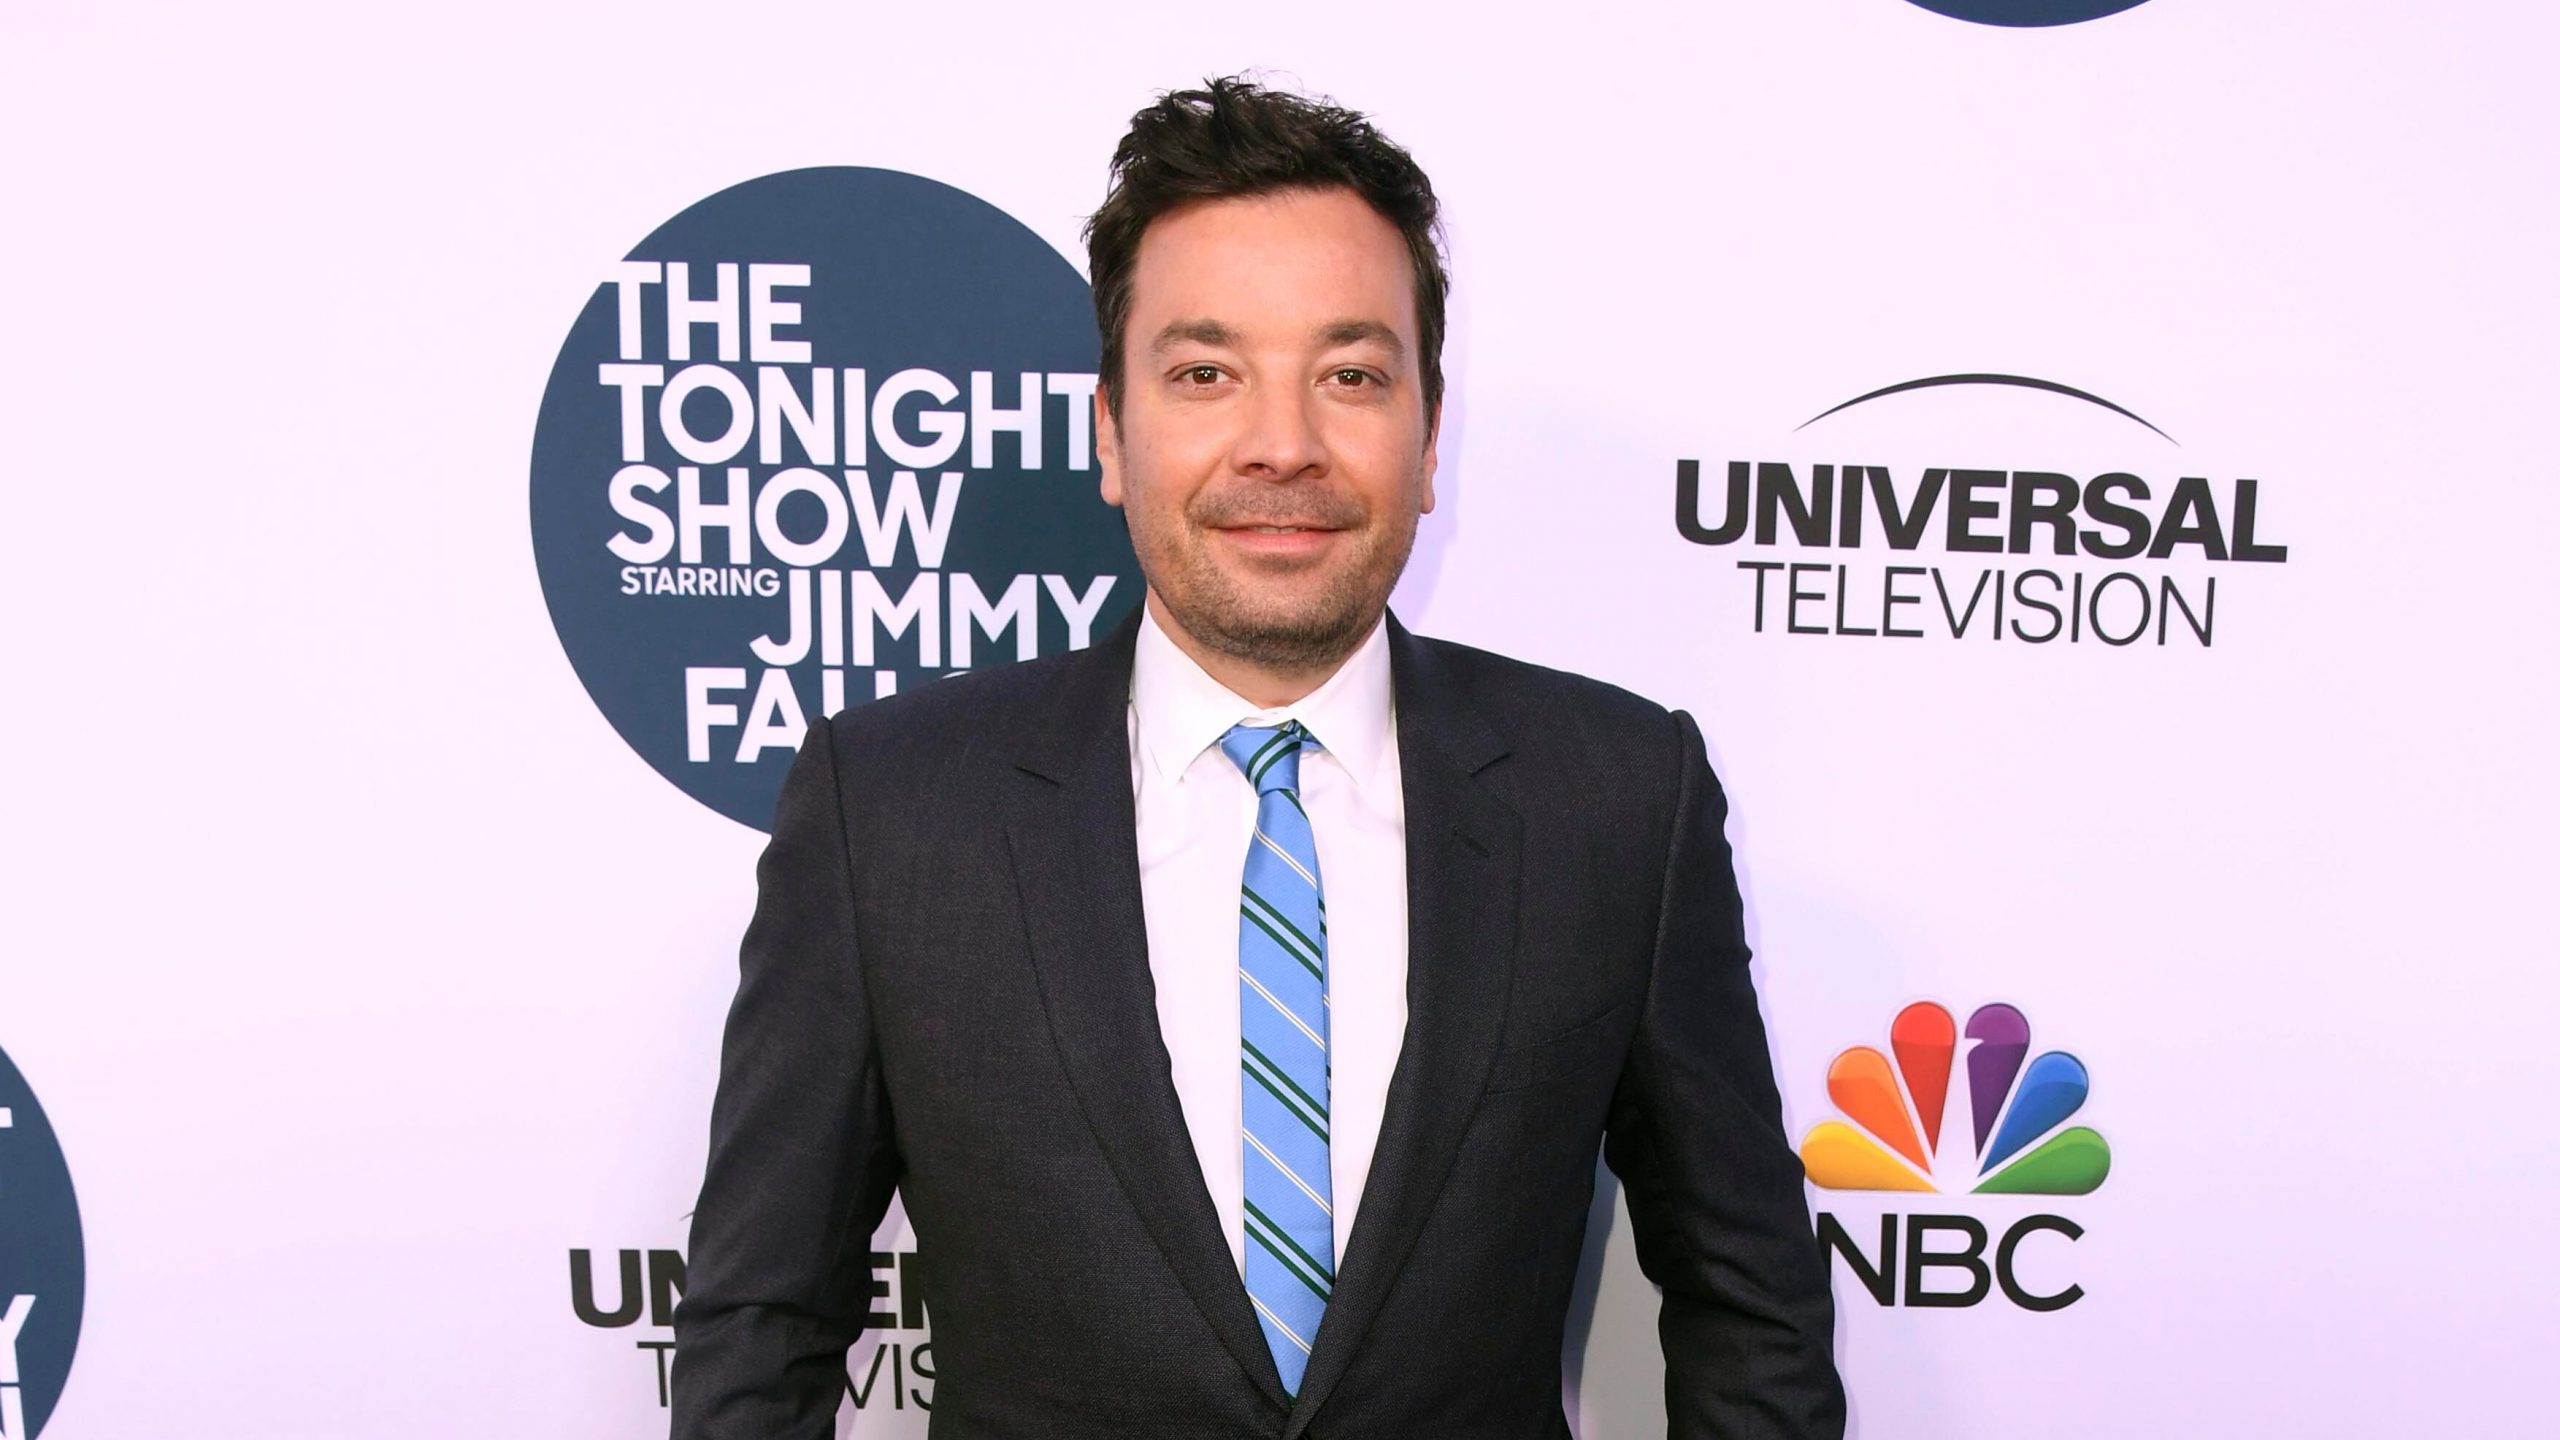 Jimmy Fallon has the lowest „Tonight“ audience rating.